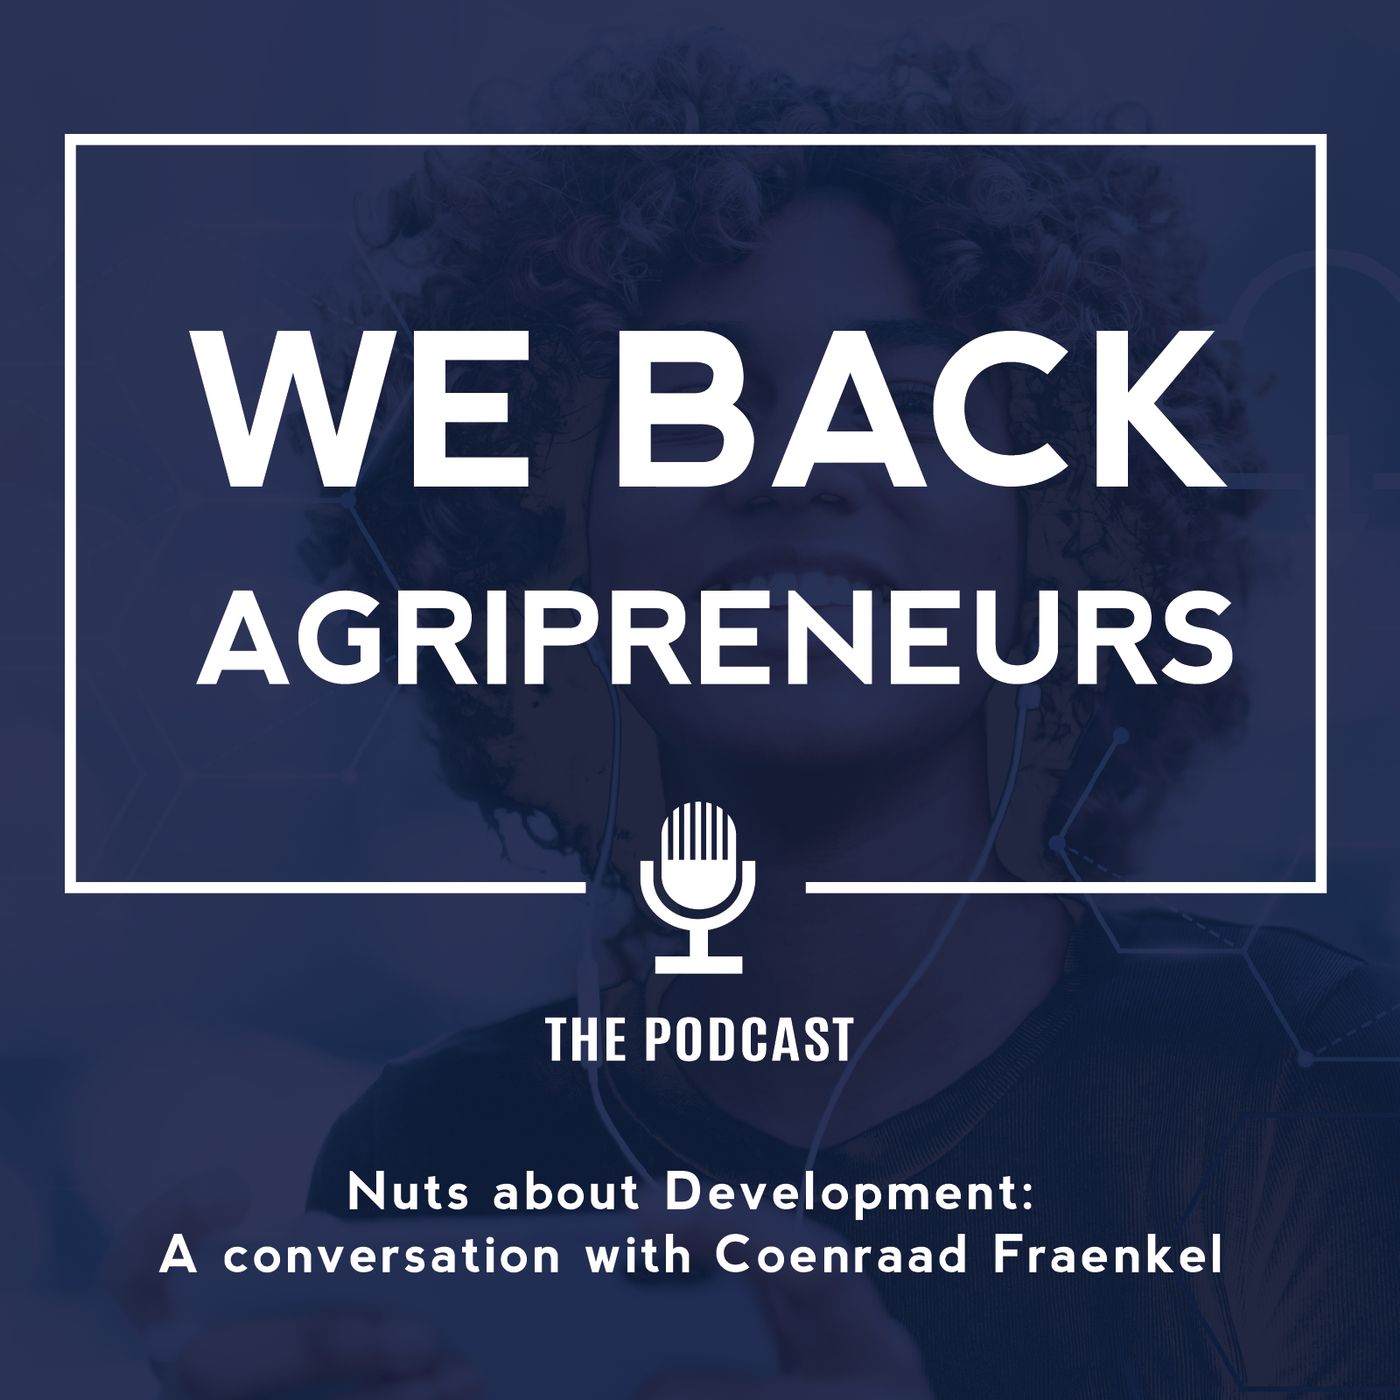 Nuts about Development: A conversation with Coenraad Fraenkel